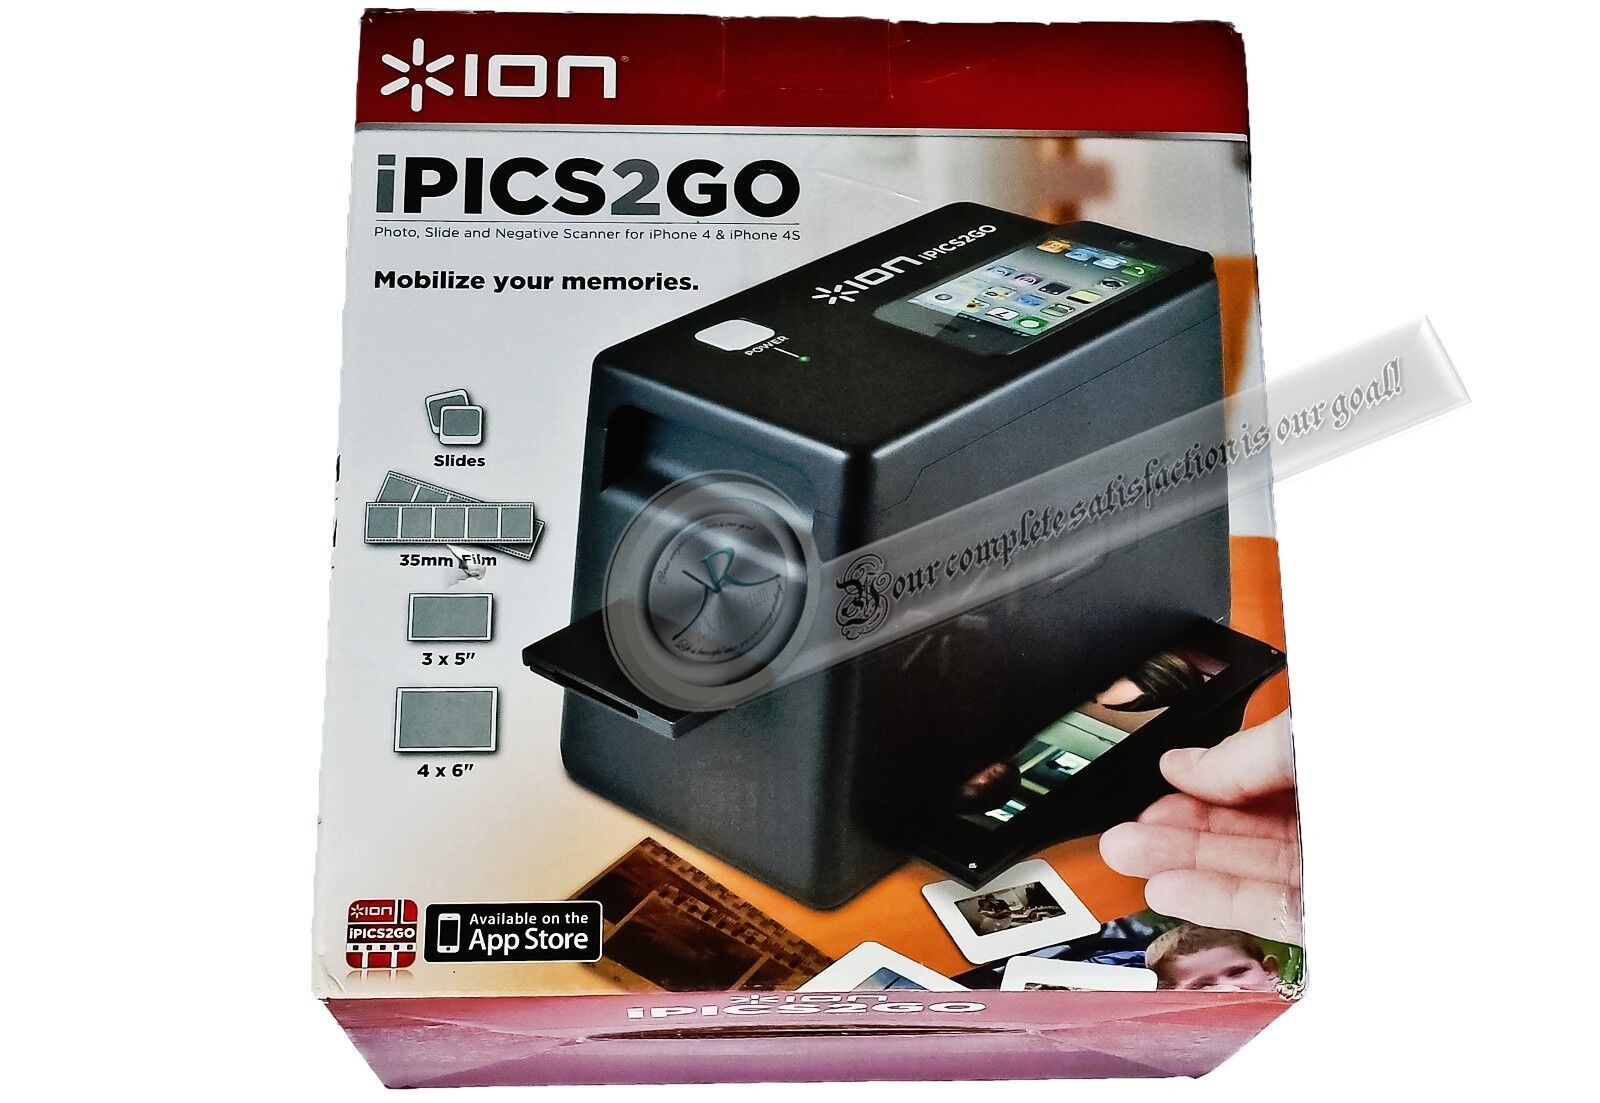 Ion ISC31 PICS2GO iPhone Scannerr for iPhone 4/4S NEW